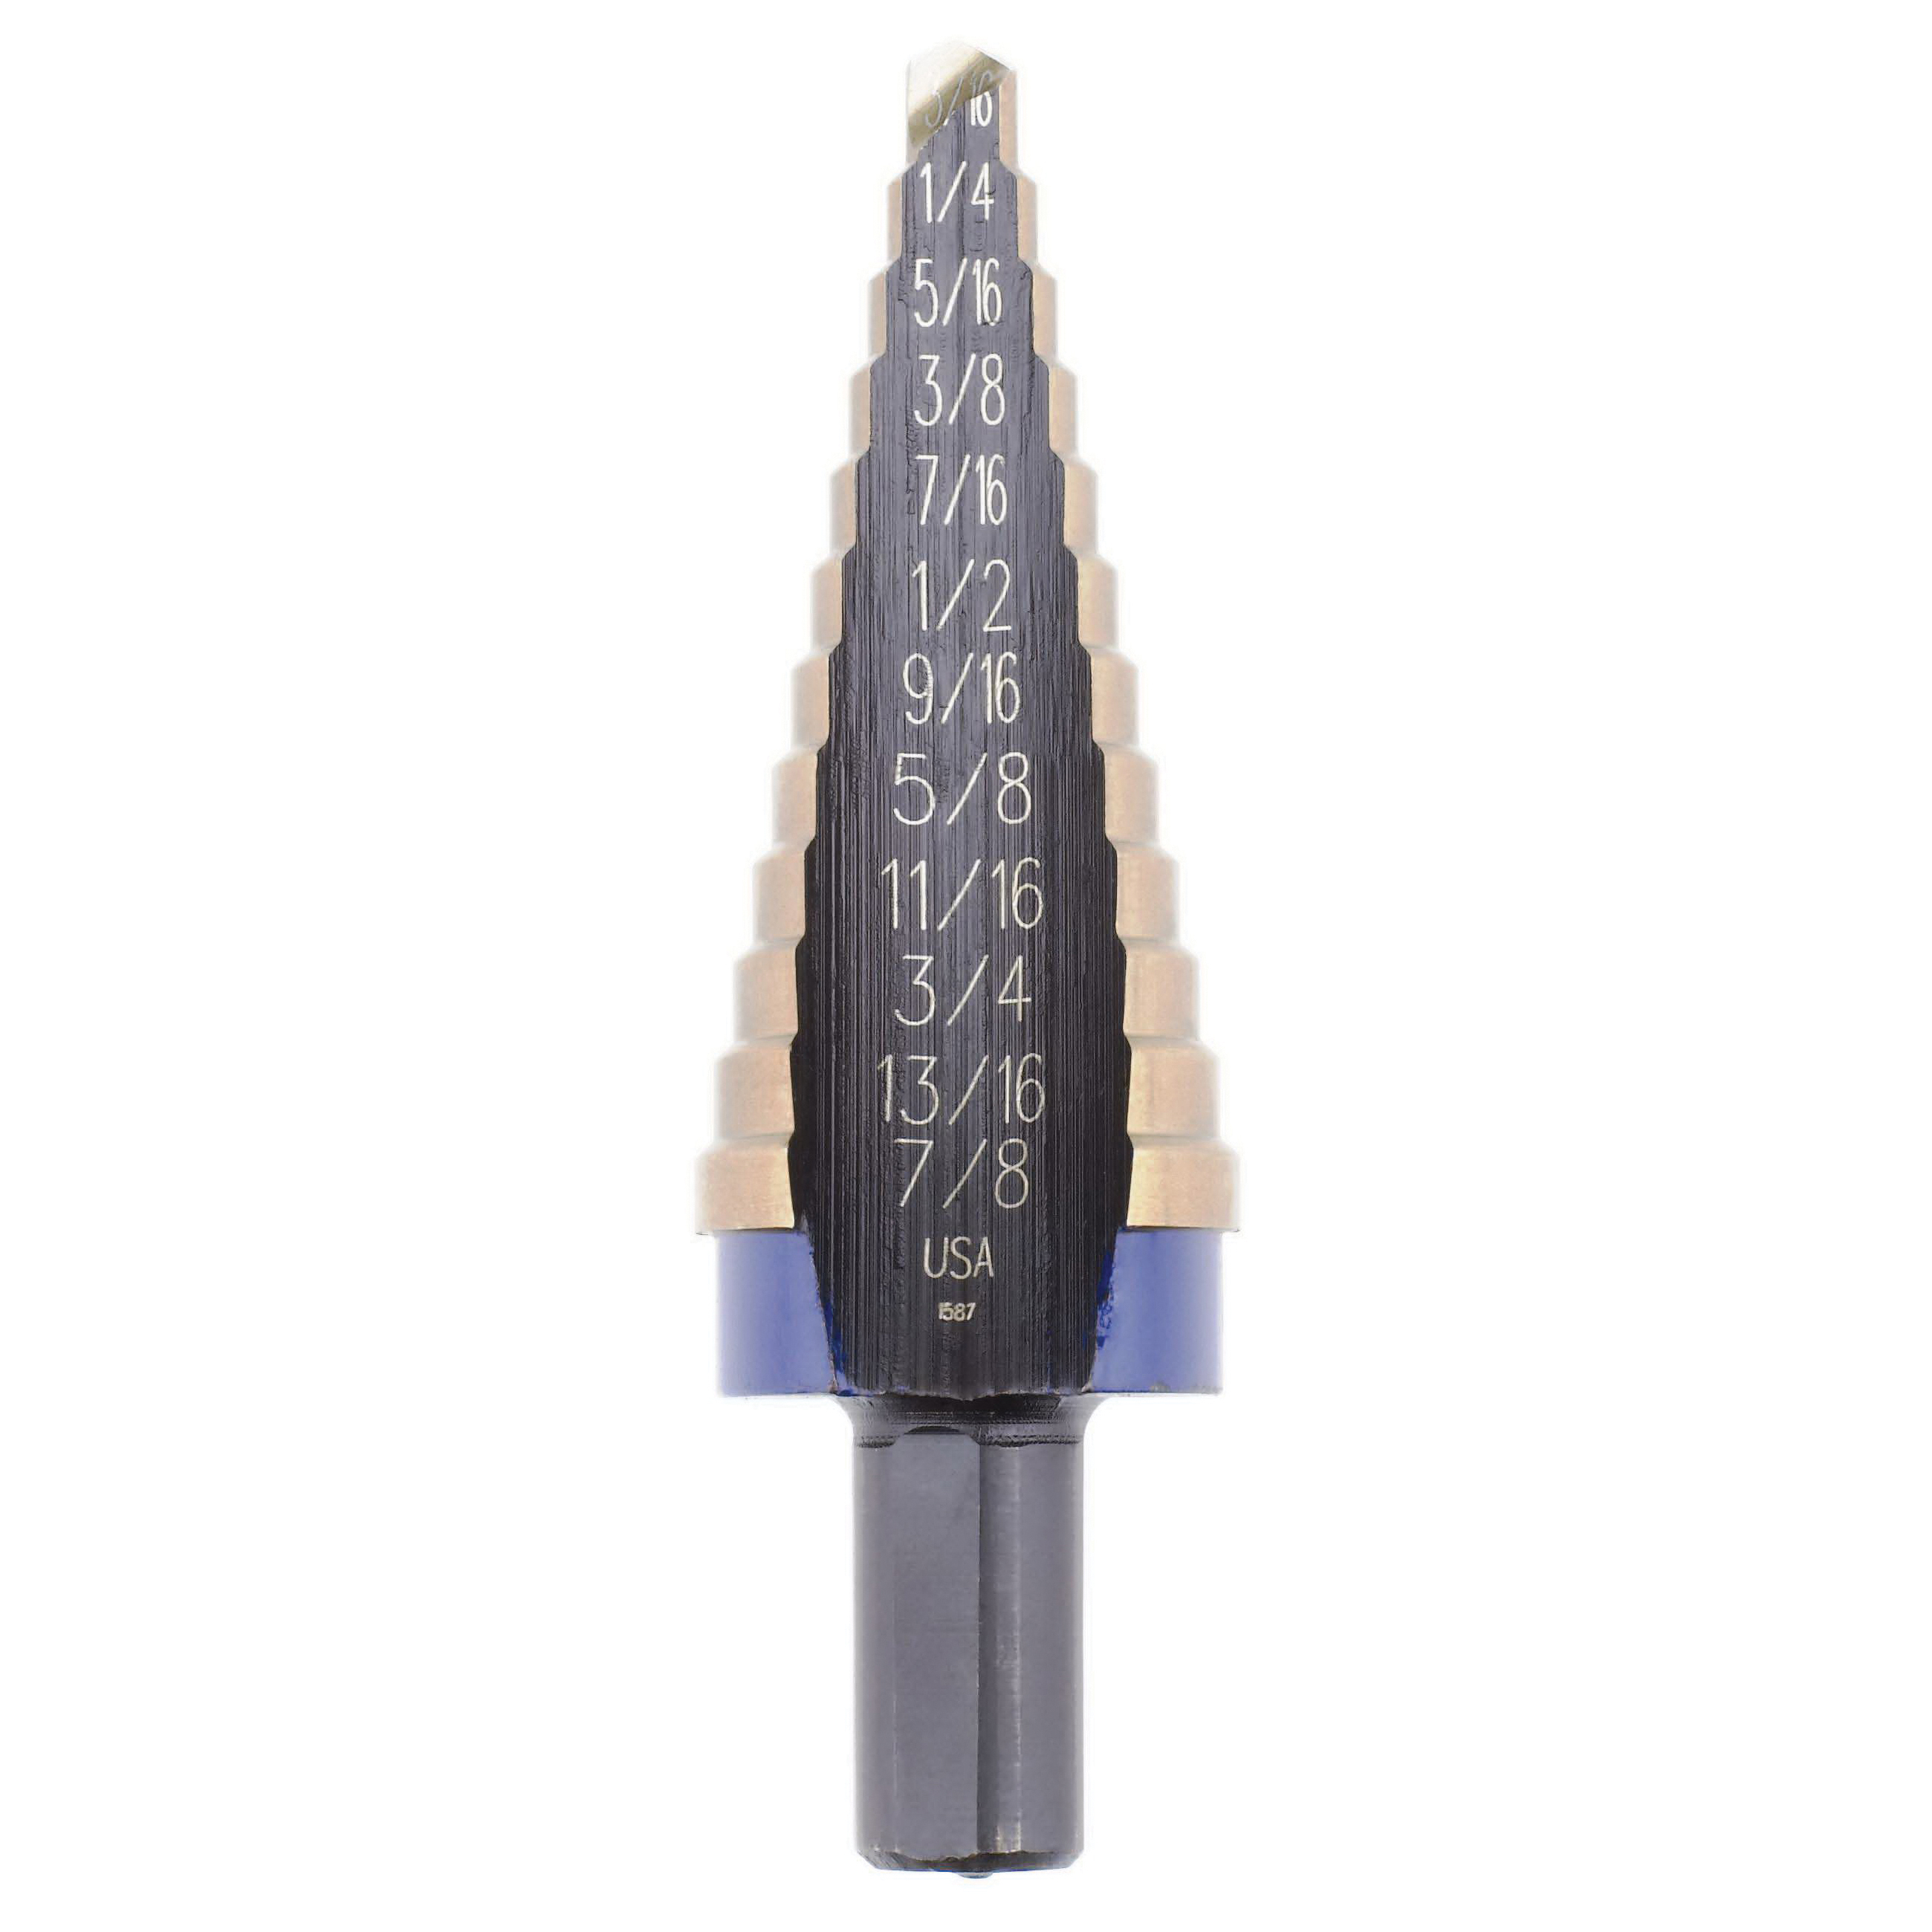 Irwin® Unibit® 10220 Hole Enlarging Step Drill Bit, 9/16 in Dia Min Hole, 1 in Dia Max Hole, 8 Steps, 8 Hole Sizes, 7/16 in Shank